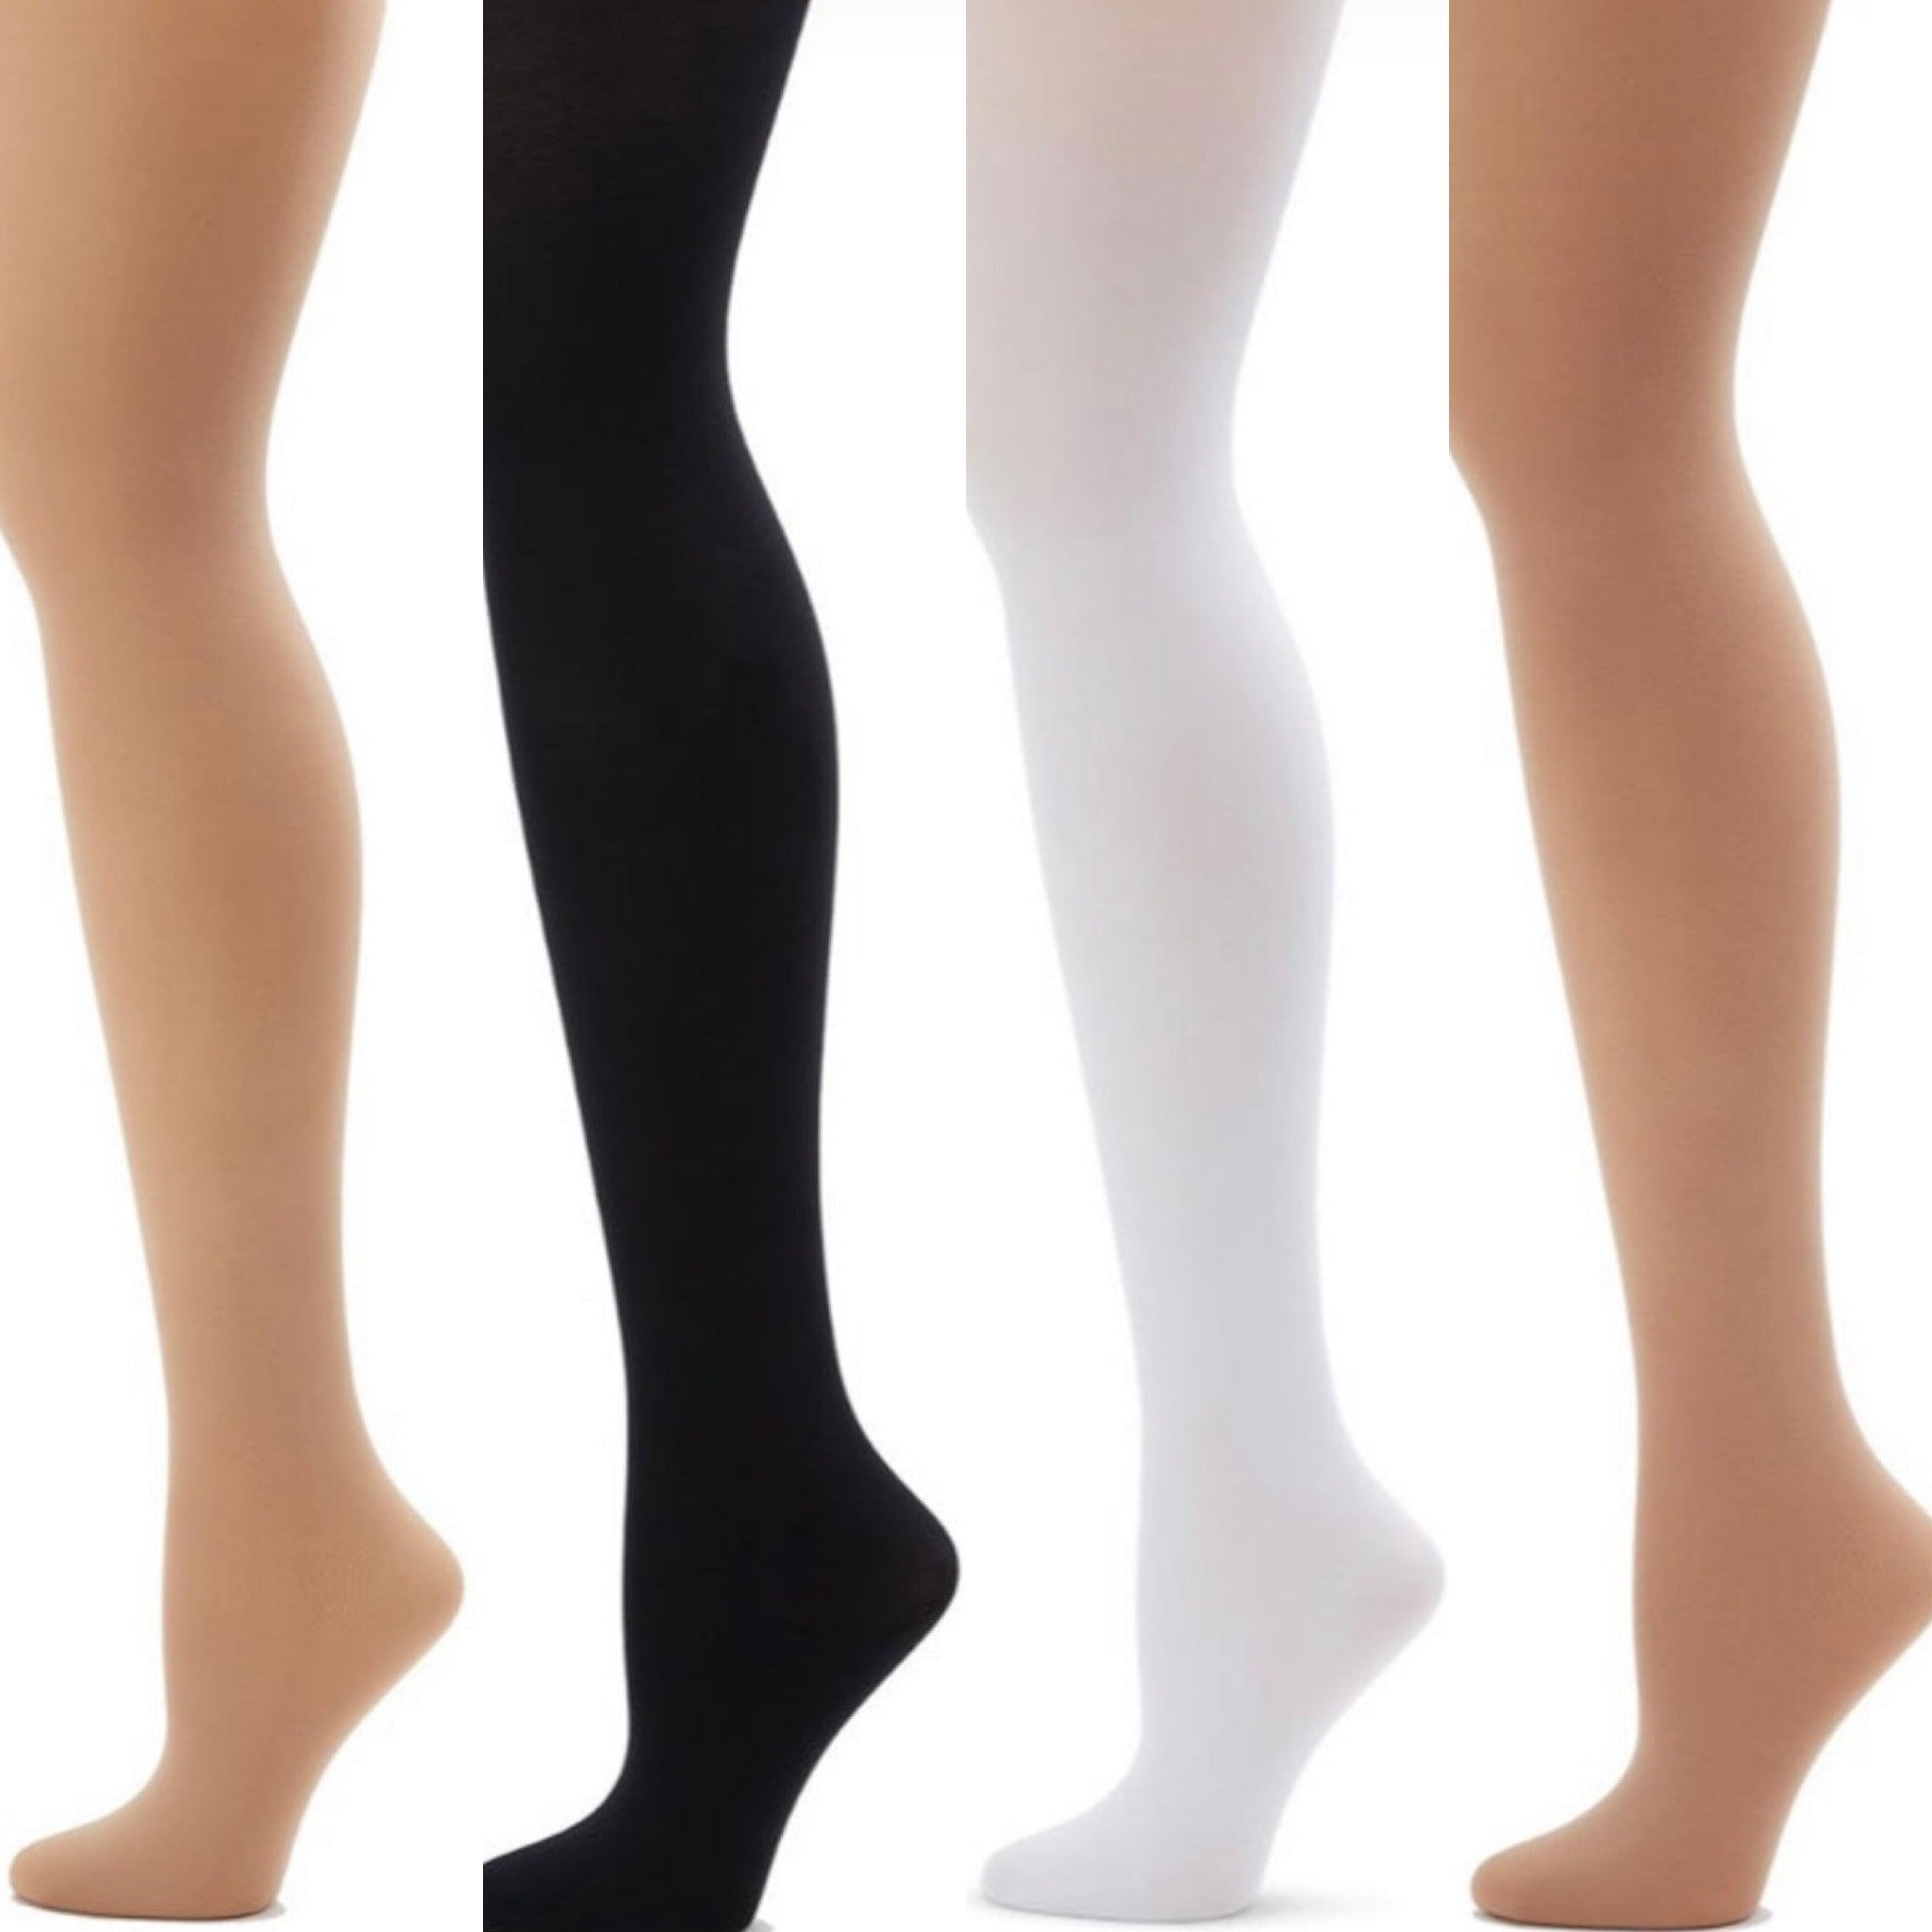 30% OFF Tights - 2 Days ONLY! - Capezio